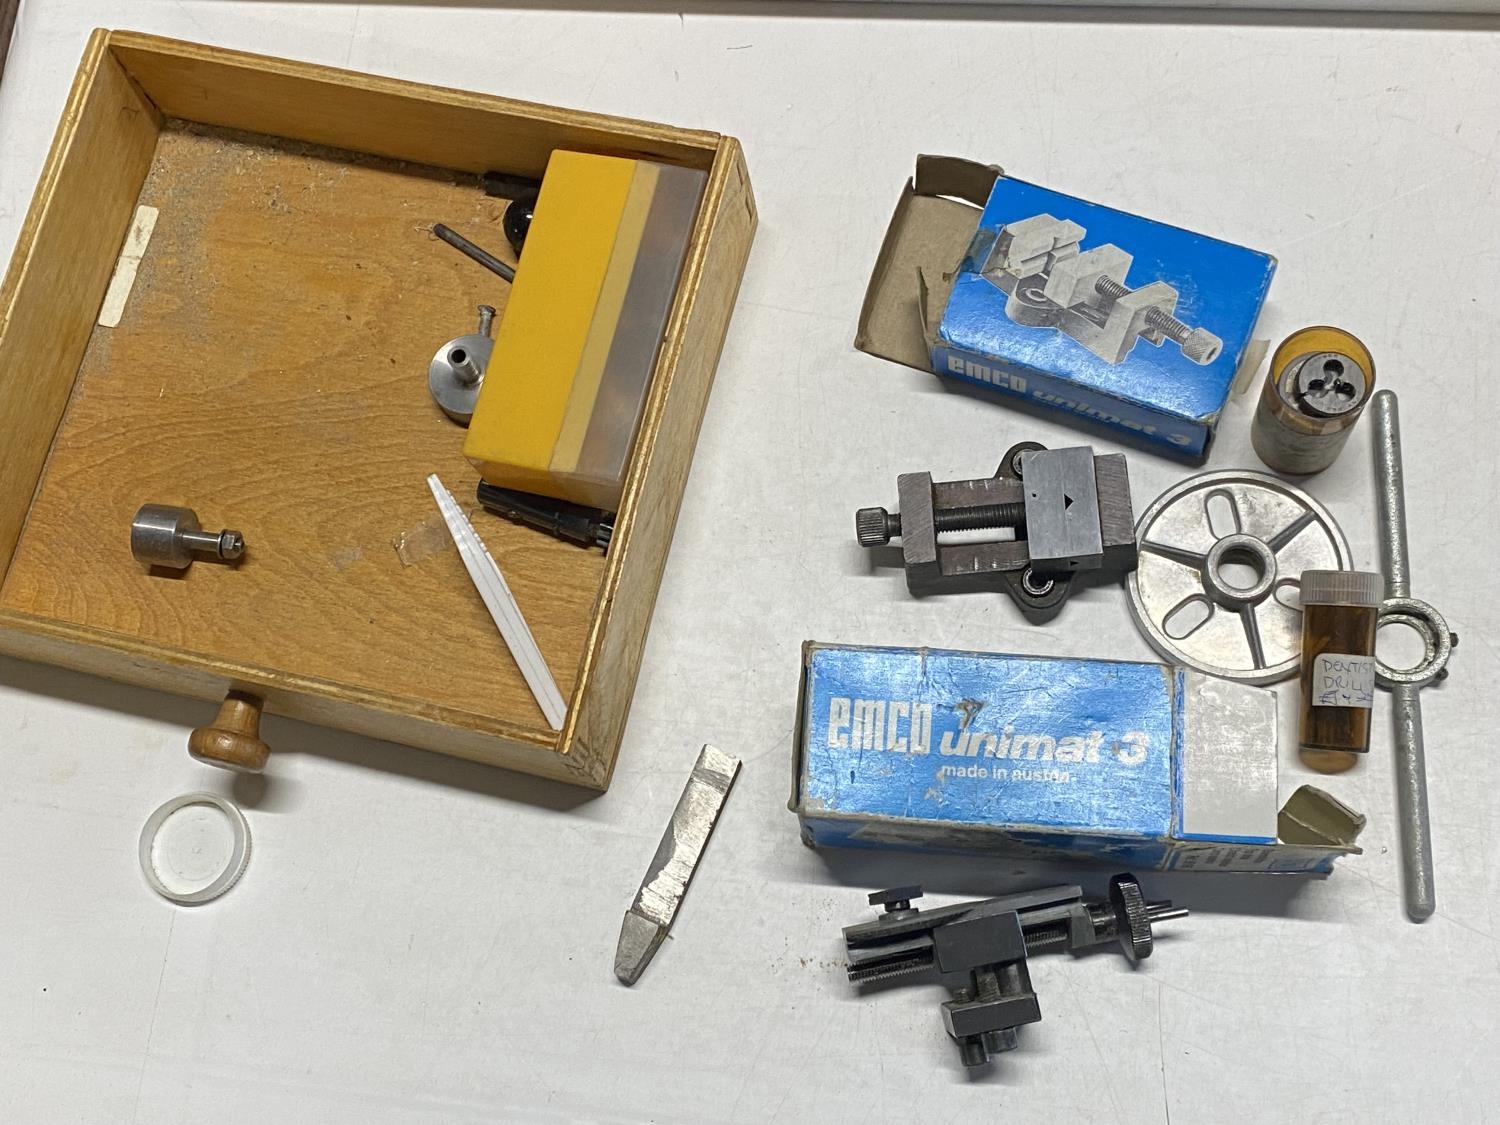 An EMCO Unimat 3 watch makers lathe with accessories mounted on custom built box in working order, - Image 6 of 9